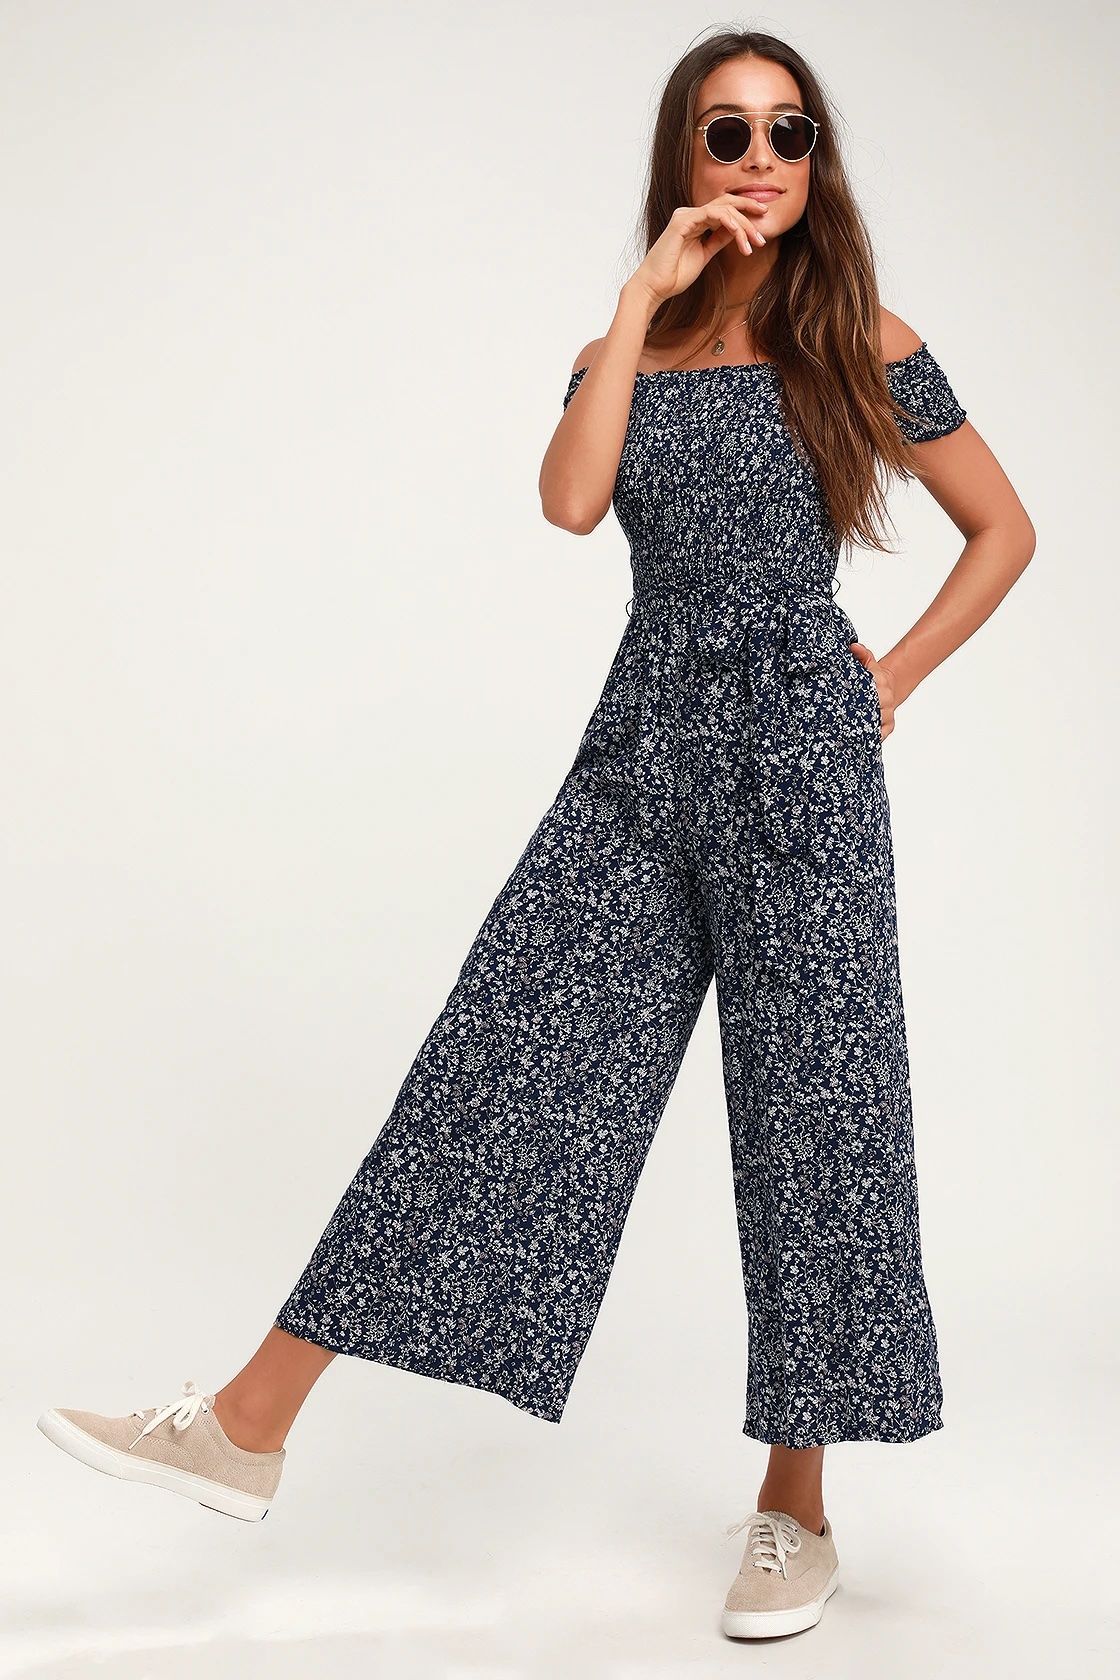 Cute Rompers & Jumpsuits for Women  White, Black, Floral & More - Lulus